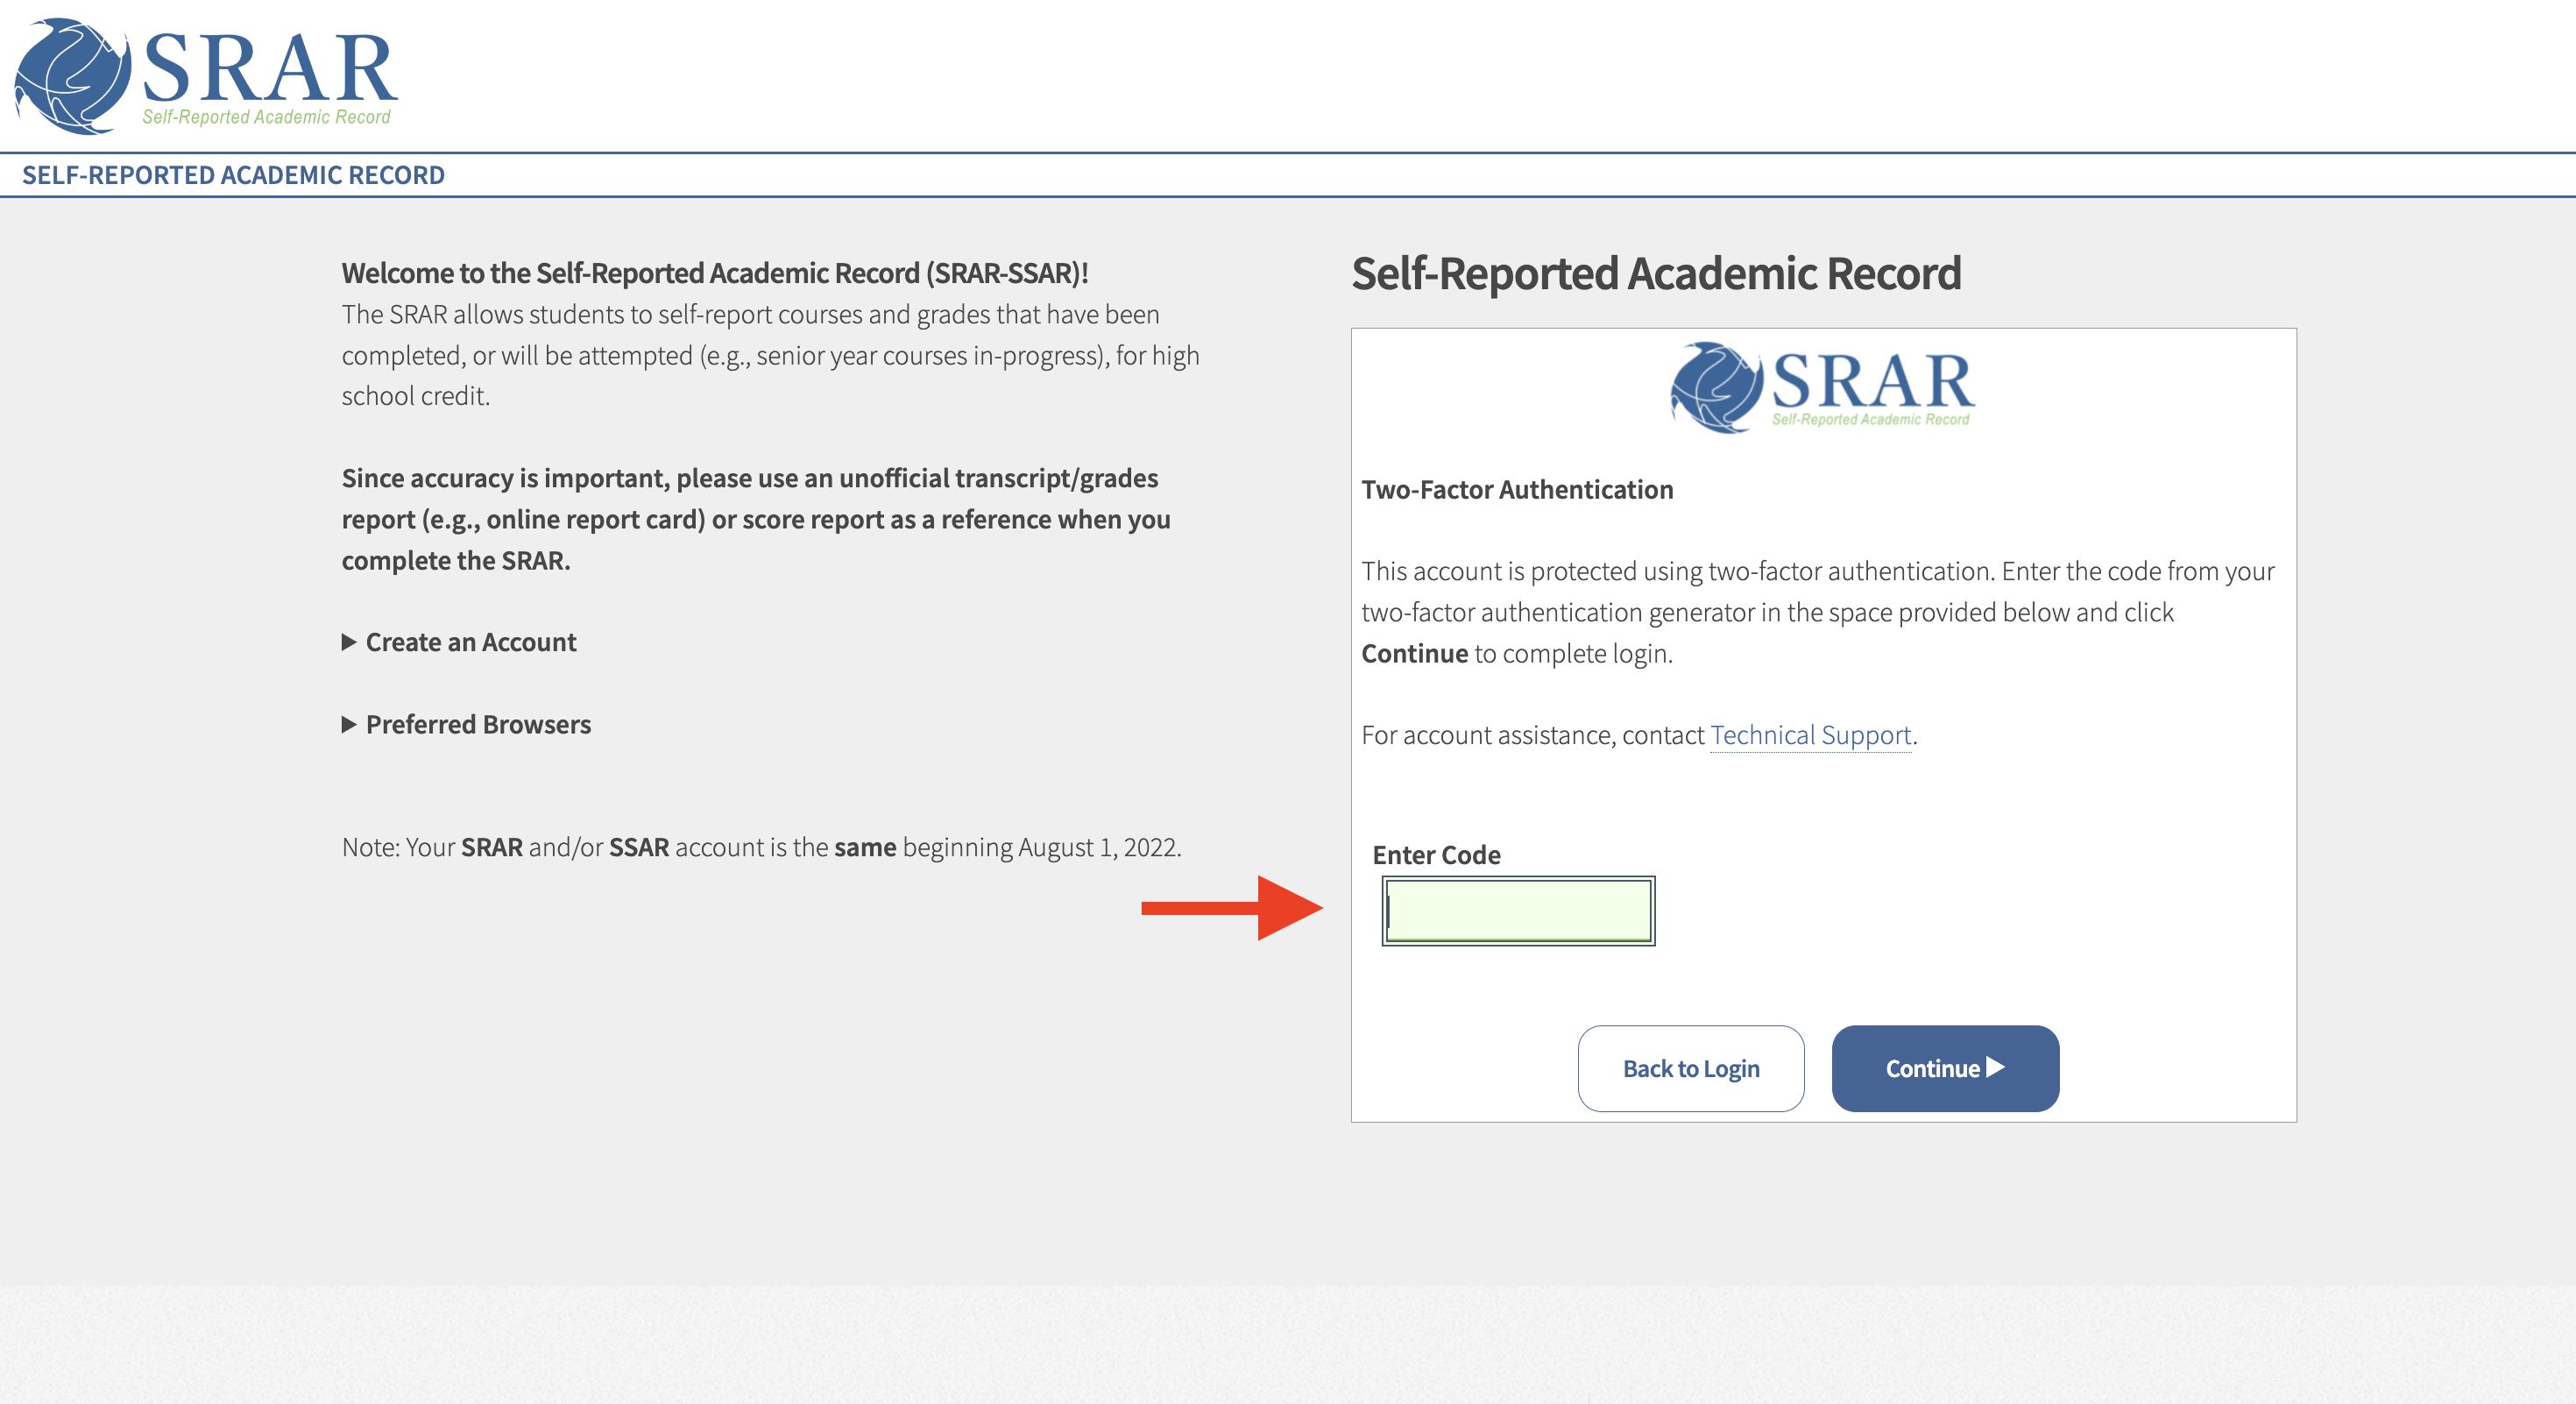 How do I log in to my SRAR/SSAR account with two-factor authentication enabled?